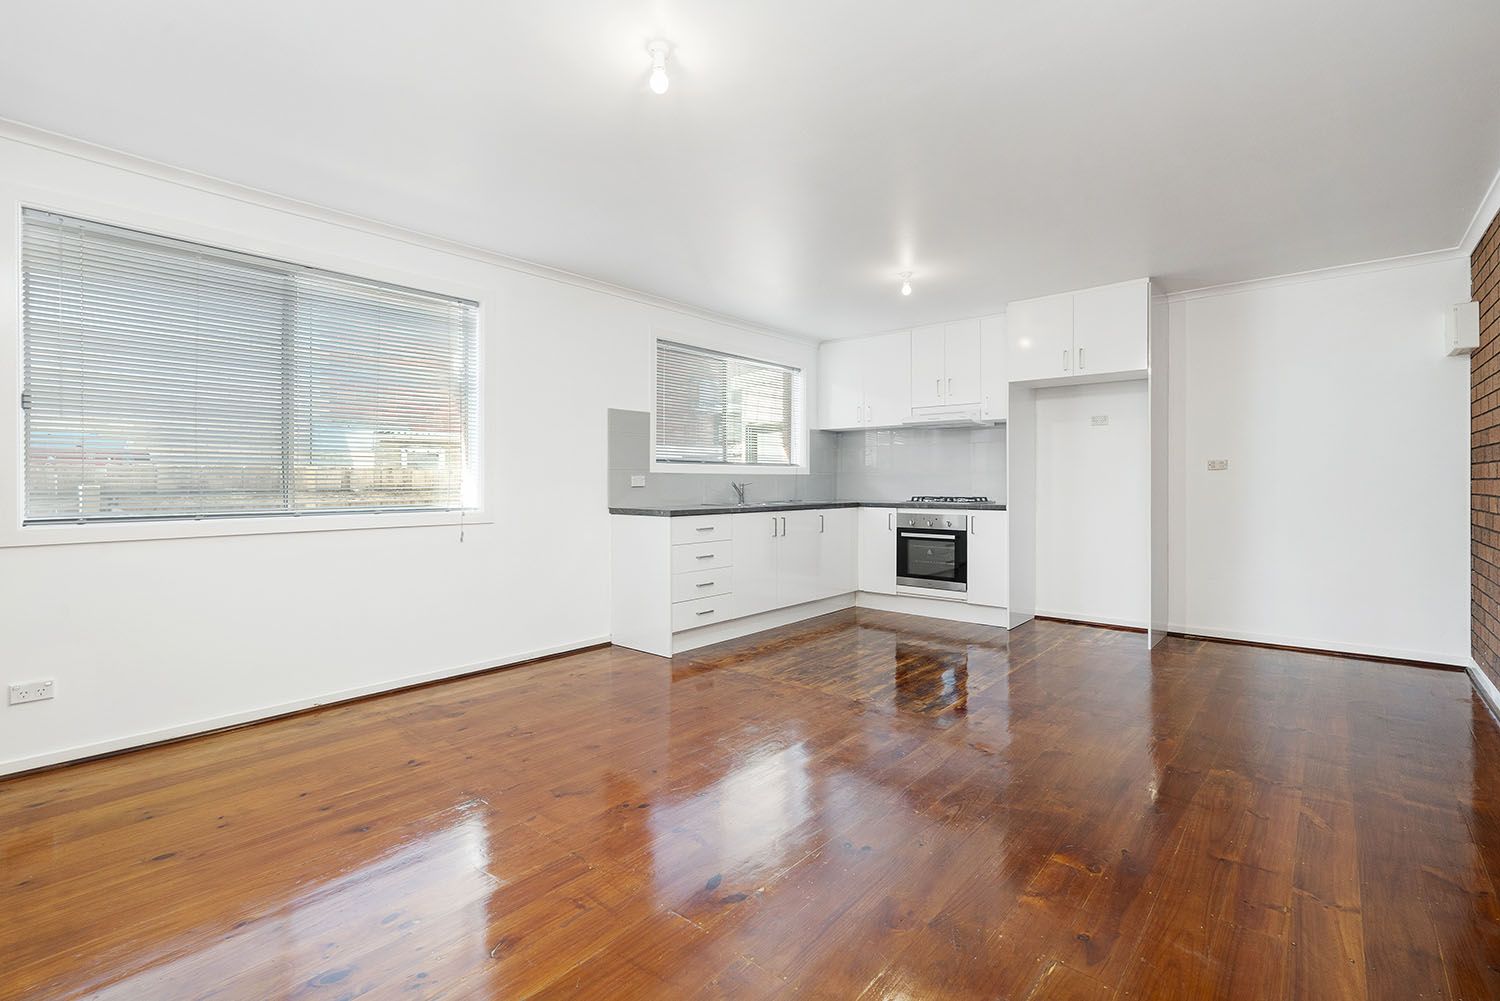 2 bedrooms Apartment / Unit / Flat in 949 Centre Road BENTLEIGH EAST VIC, 3165